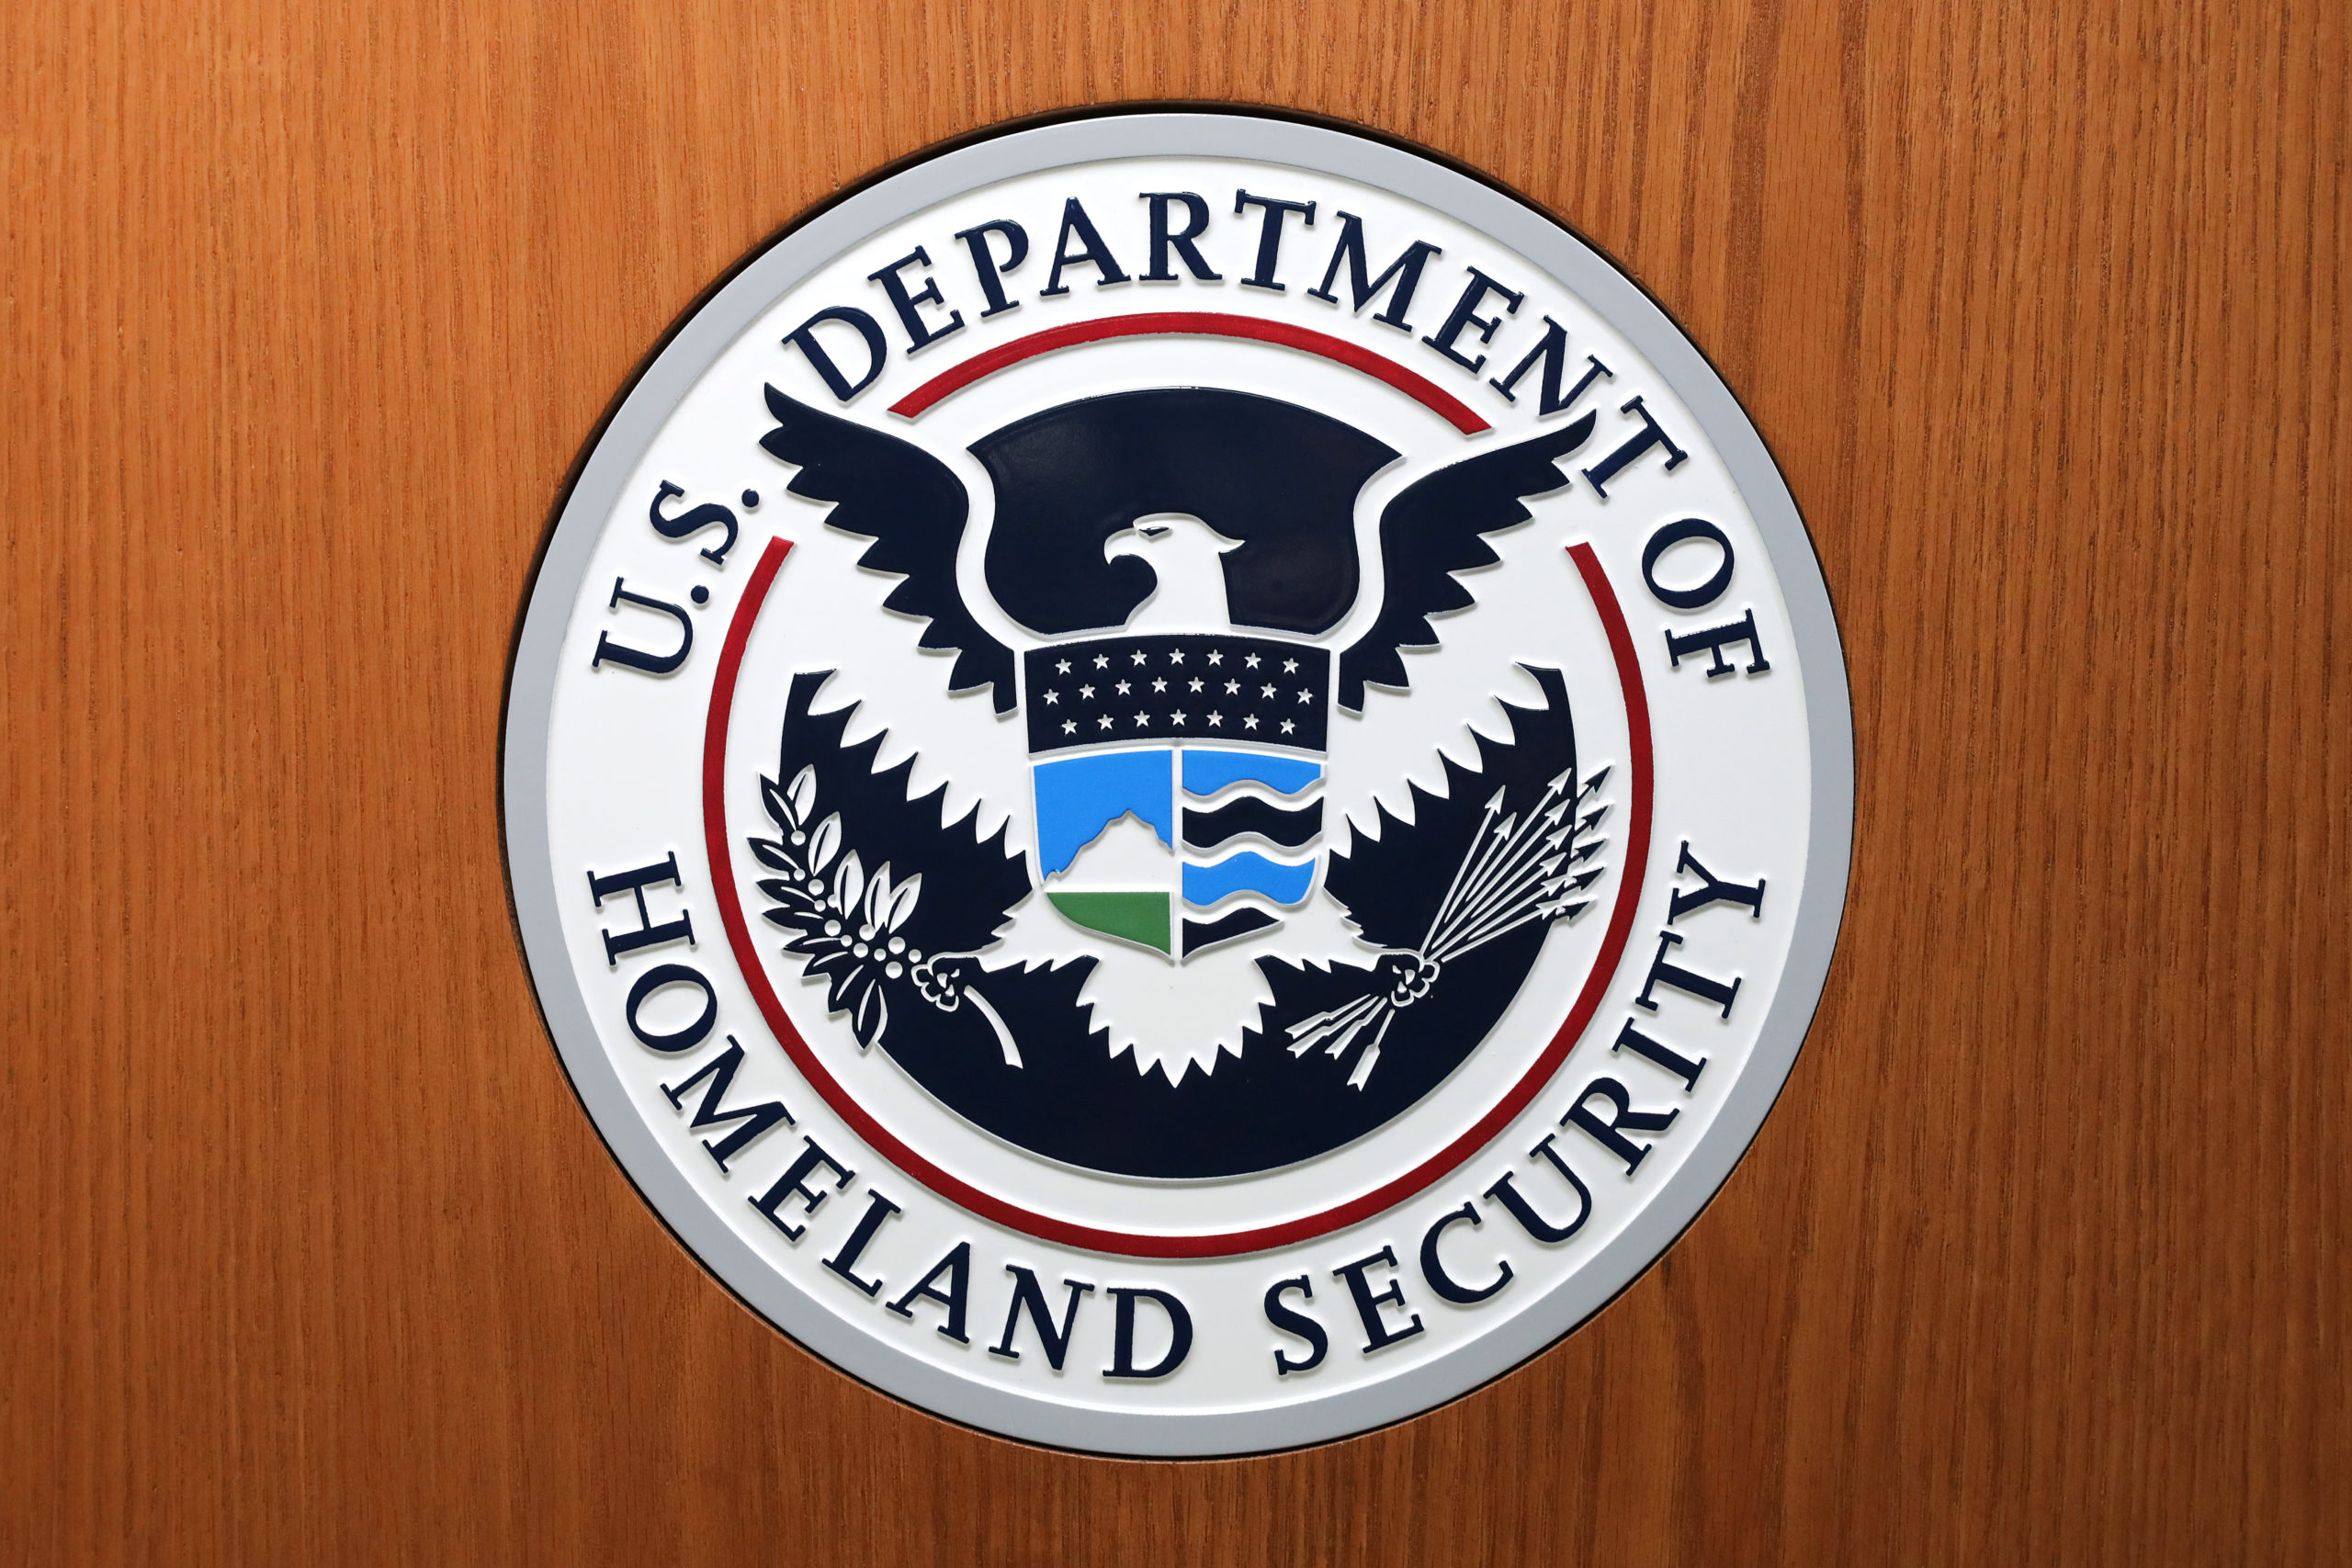 WASHINGTON, DC - AUGUST 21: The Department of Homeland Security seal on the podium used by acting Secretary Kevin McAleenan as he announces new rules about how migrant children and families are treated in federal custody at the Ronald Reagan Building August 21, 2019 in Washington, DC. The Trump Administration announced the change in rules that would allow it to indefinitely detain migrant families who cross the border illegally, replacing the Flores Agreement which limited on how long the government could hold migrant children in custody and how they must be cared for. (Photo by Chip Somodevilla/Getty Images)